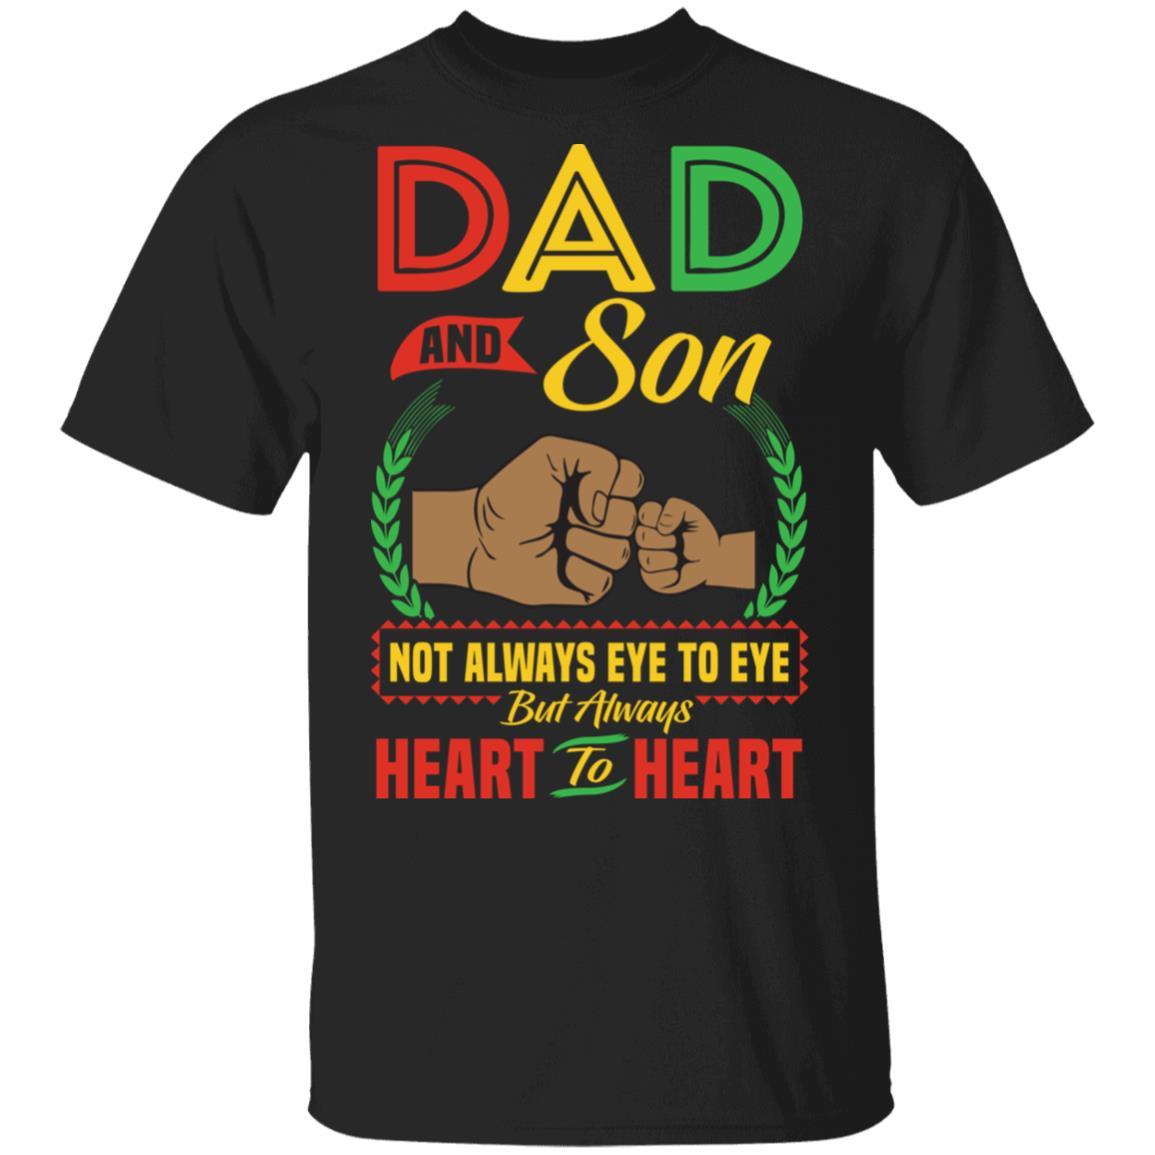 Dad And Son Heart To Heart T-Shirt & Hoodie Apparel CustomCat Unisex Tee Black S